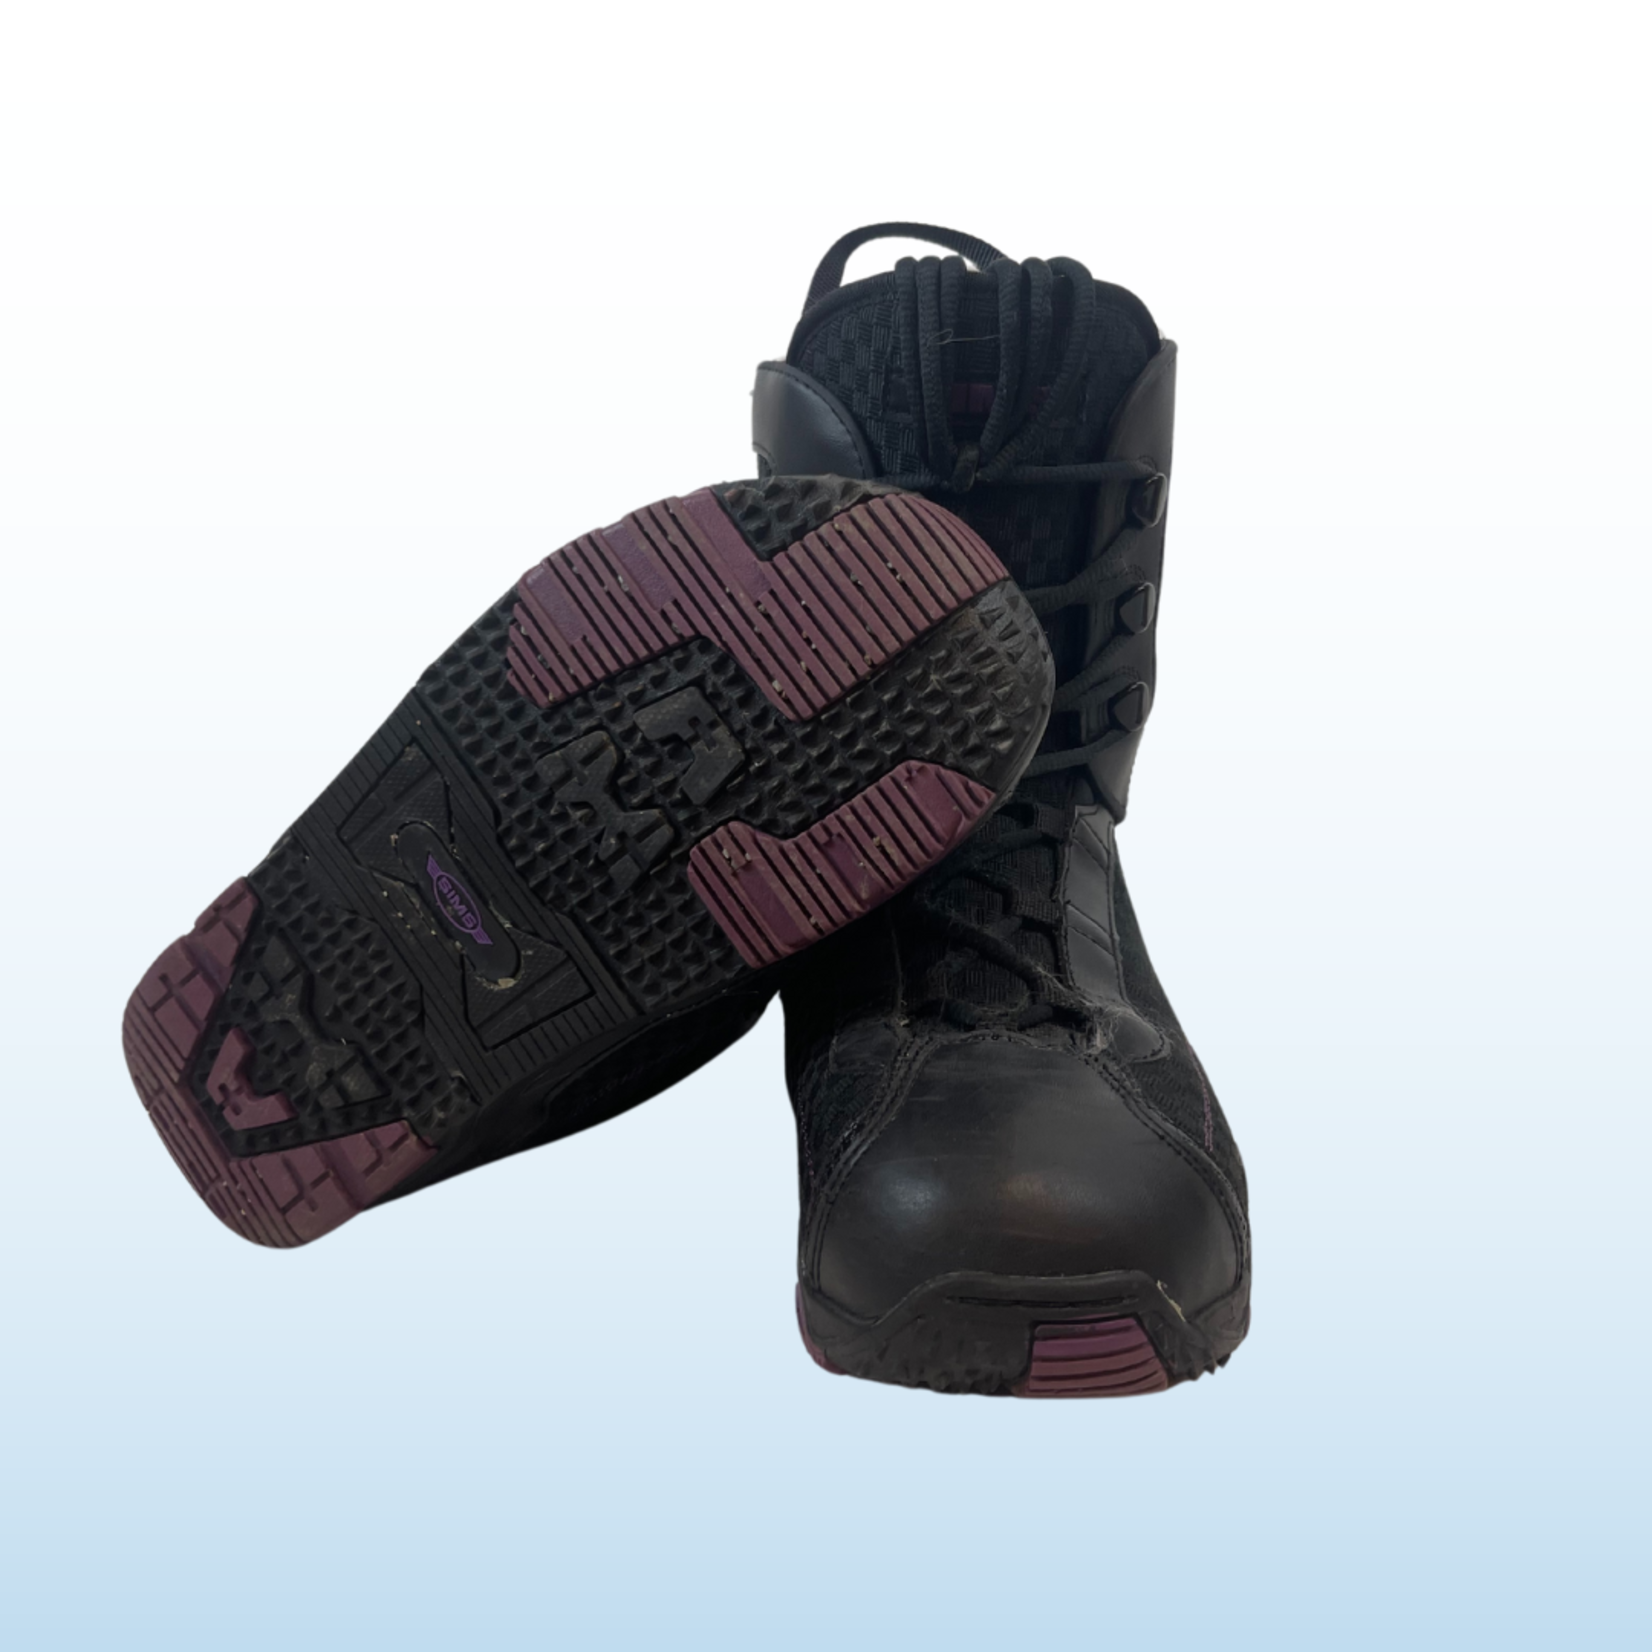 Sims Sims Omen WMNS Snowboard Boots, Size 8